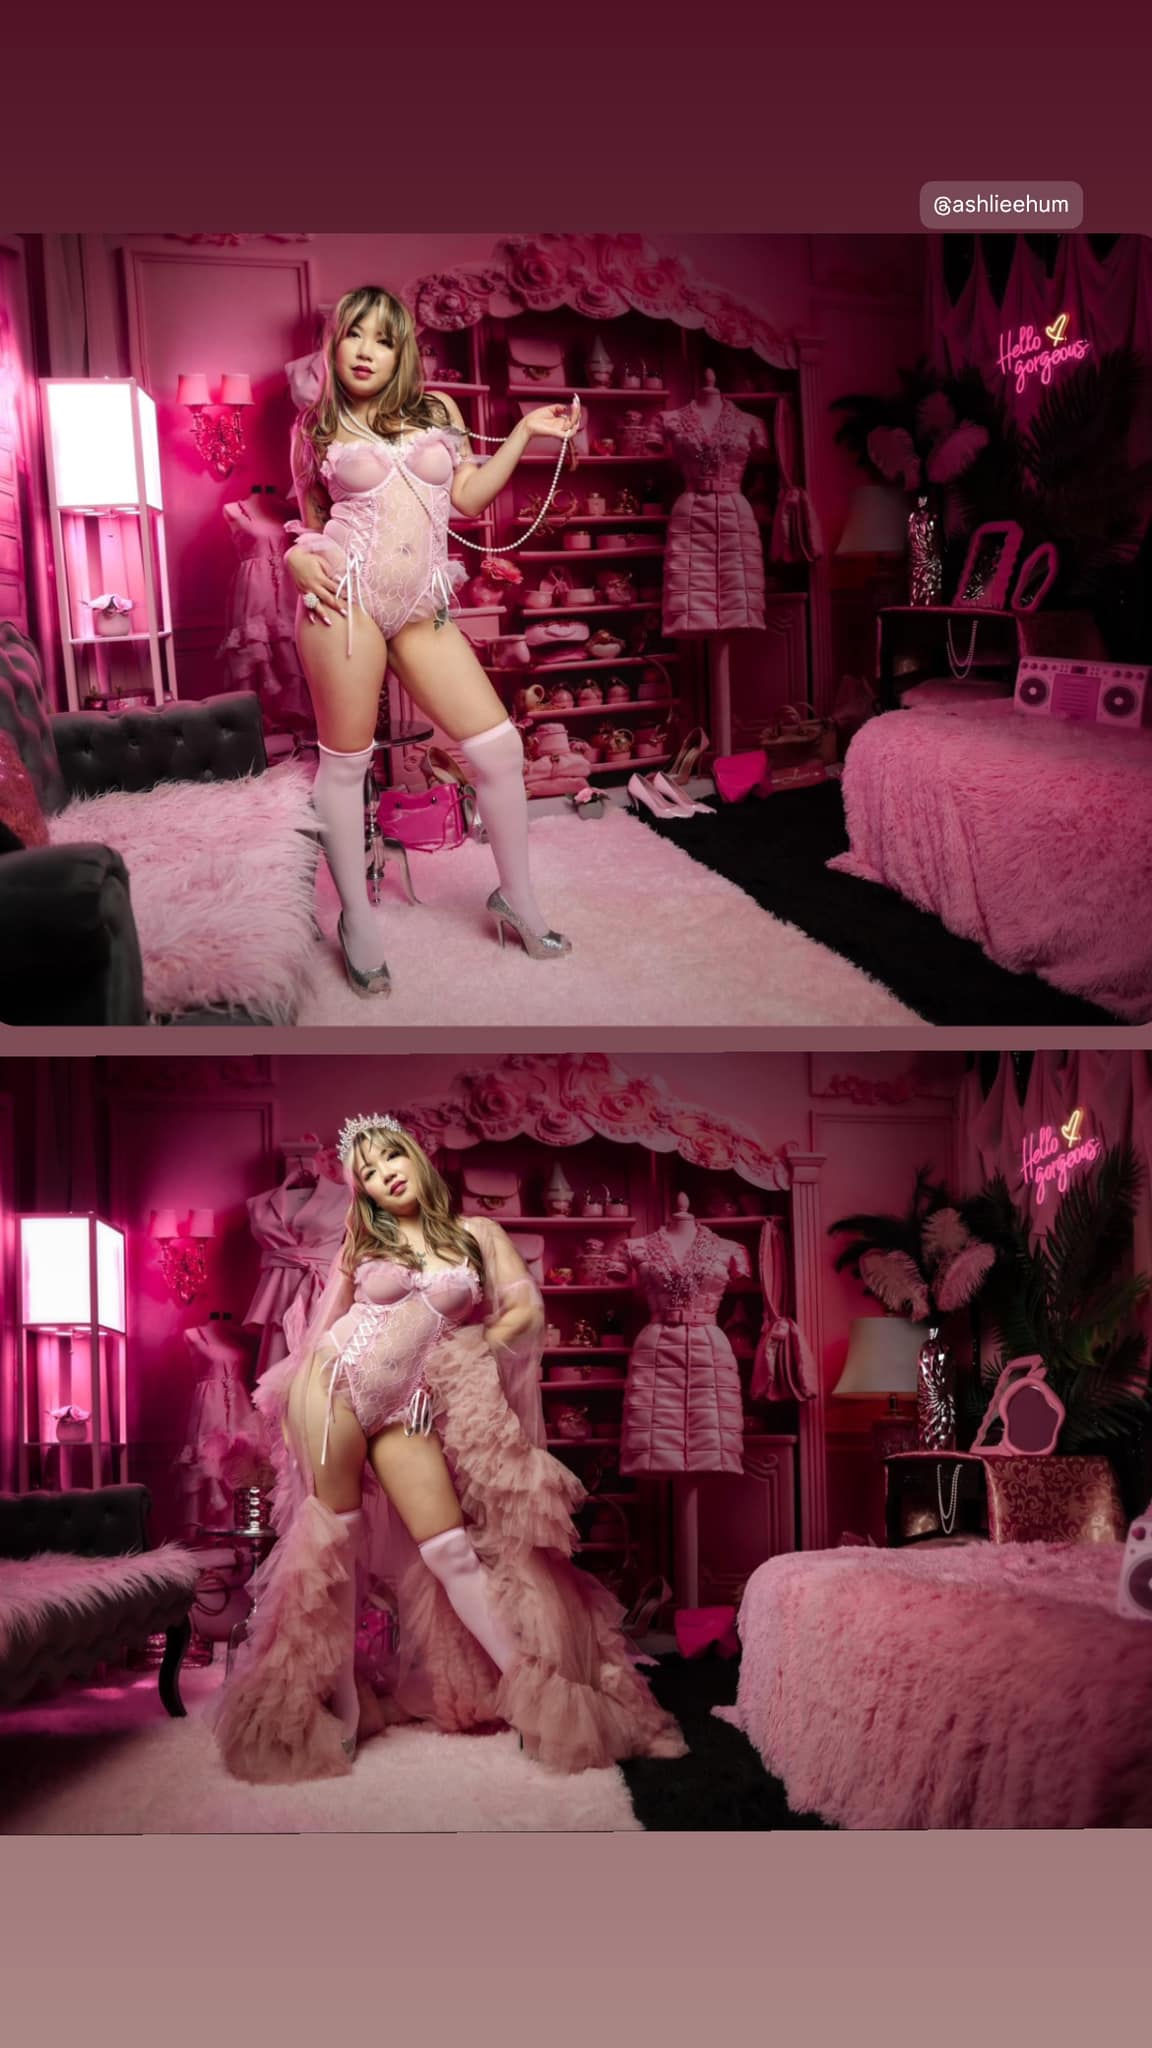 Kate Fashion Doll Pink Room Backdrop Designed by Emetselch